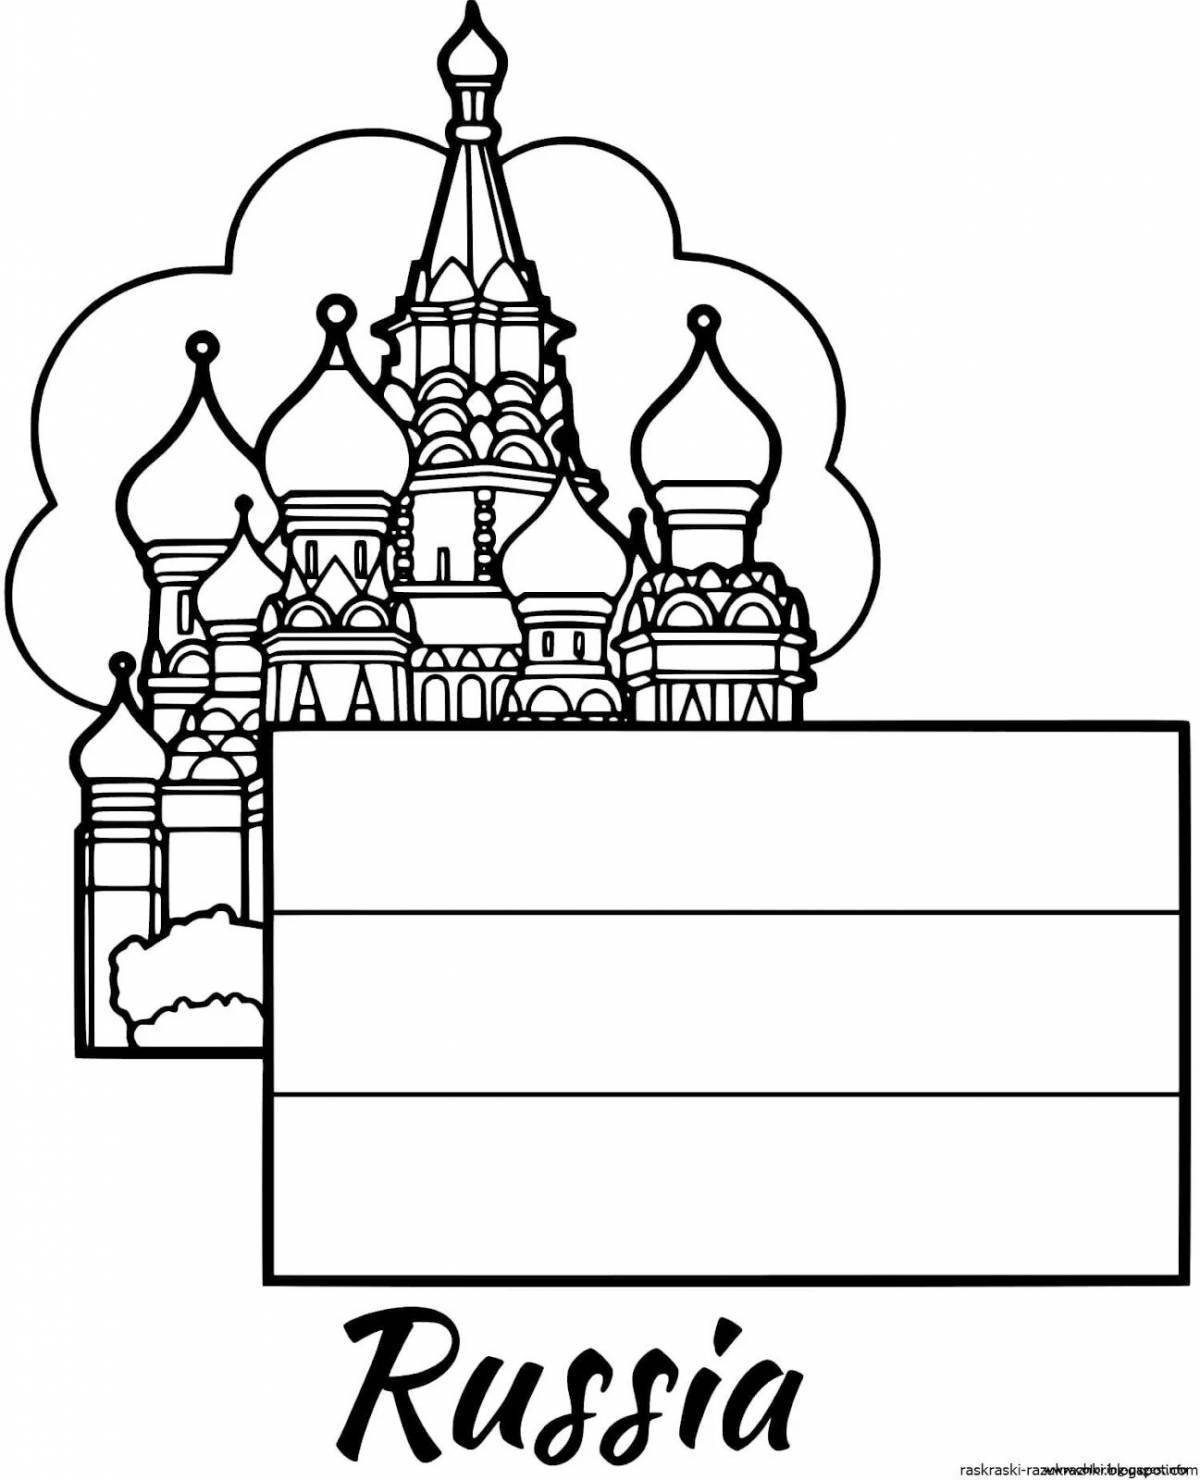 Coloring page for complex Russian characters